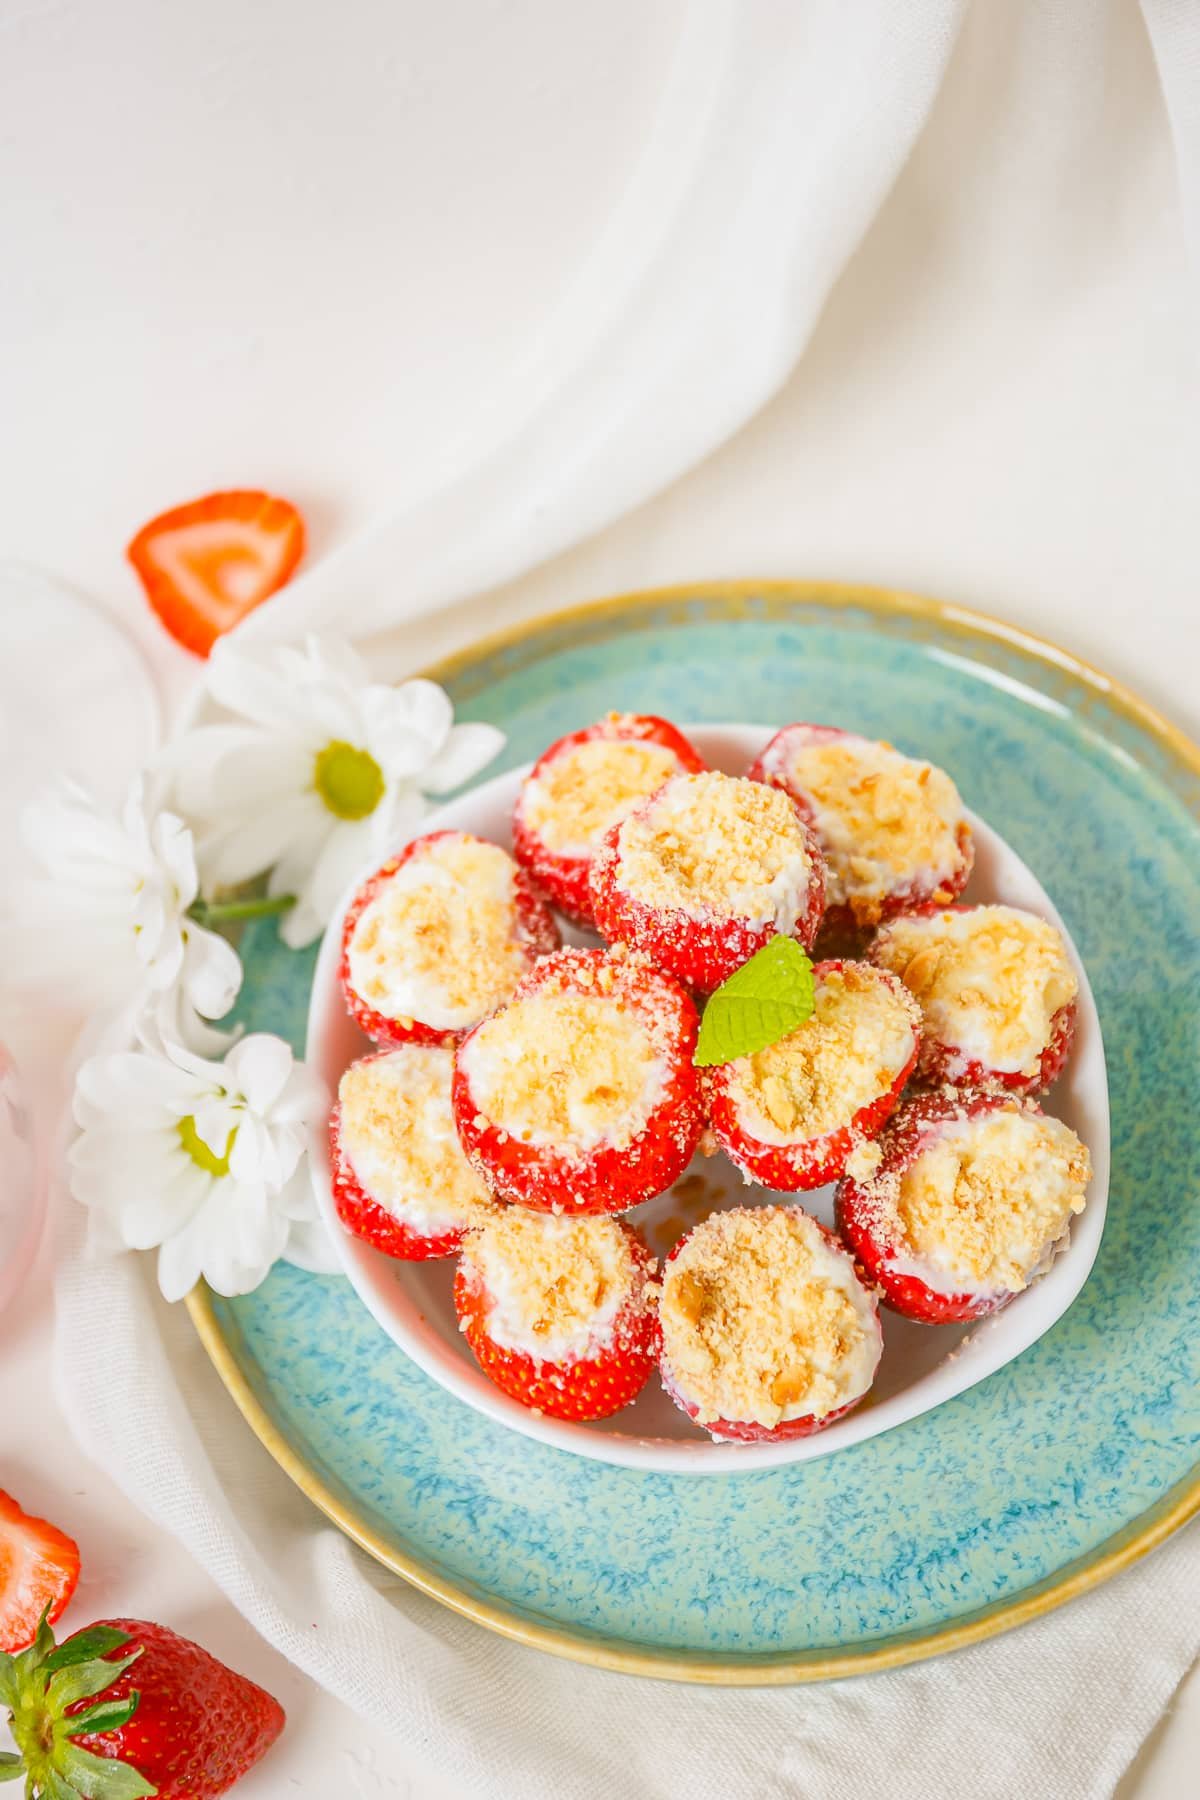 Cheesecake Stuffed Strawberries in a serving bowl on a blue plate